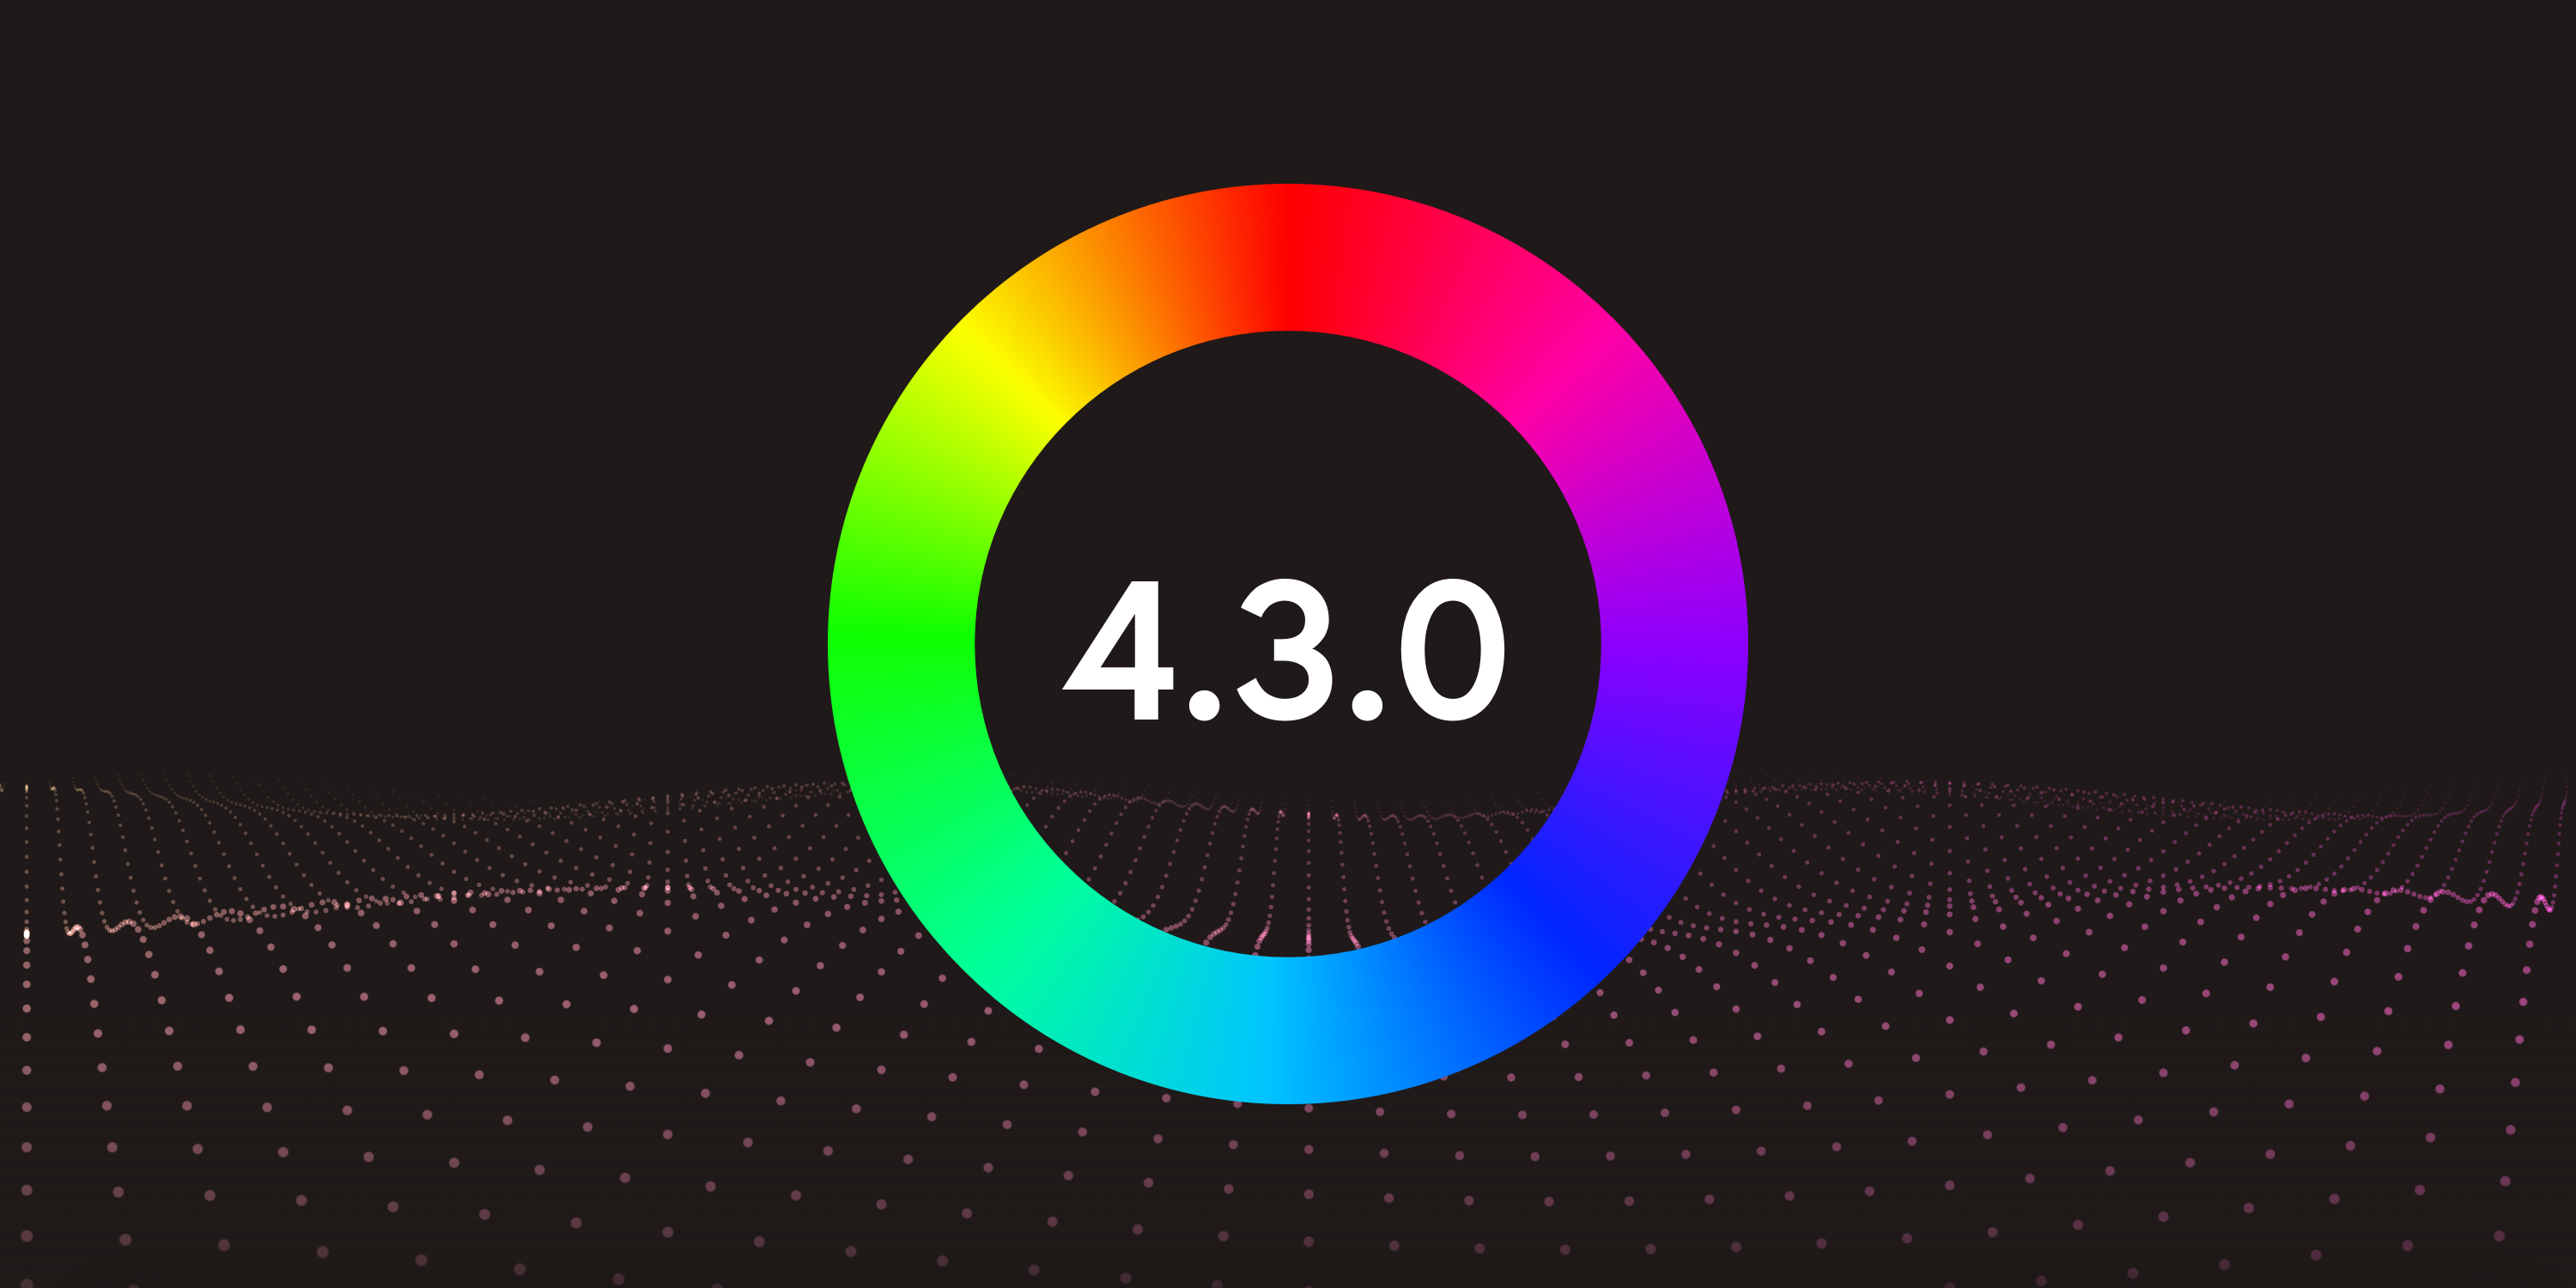 Framework7 4.3.0 - The Most Colorful Update